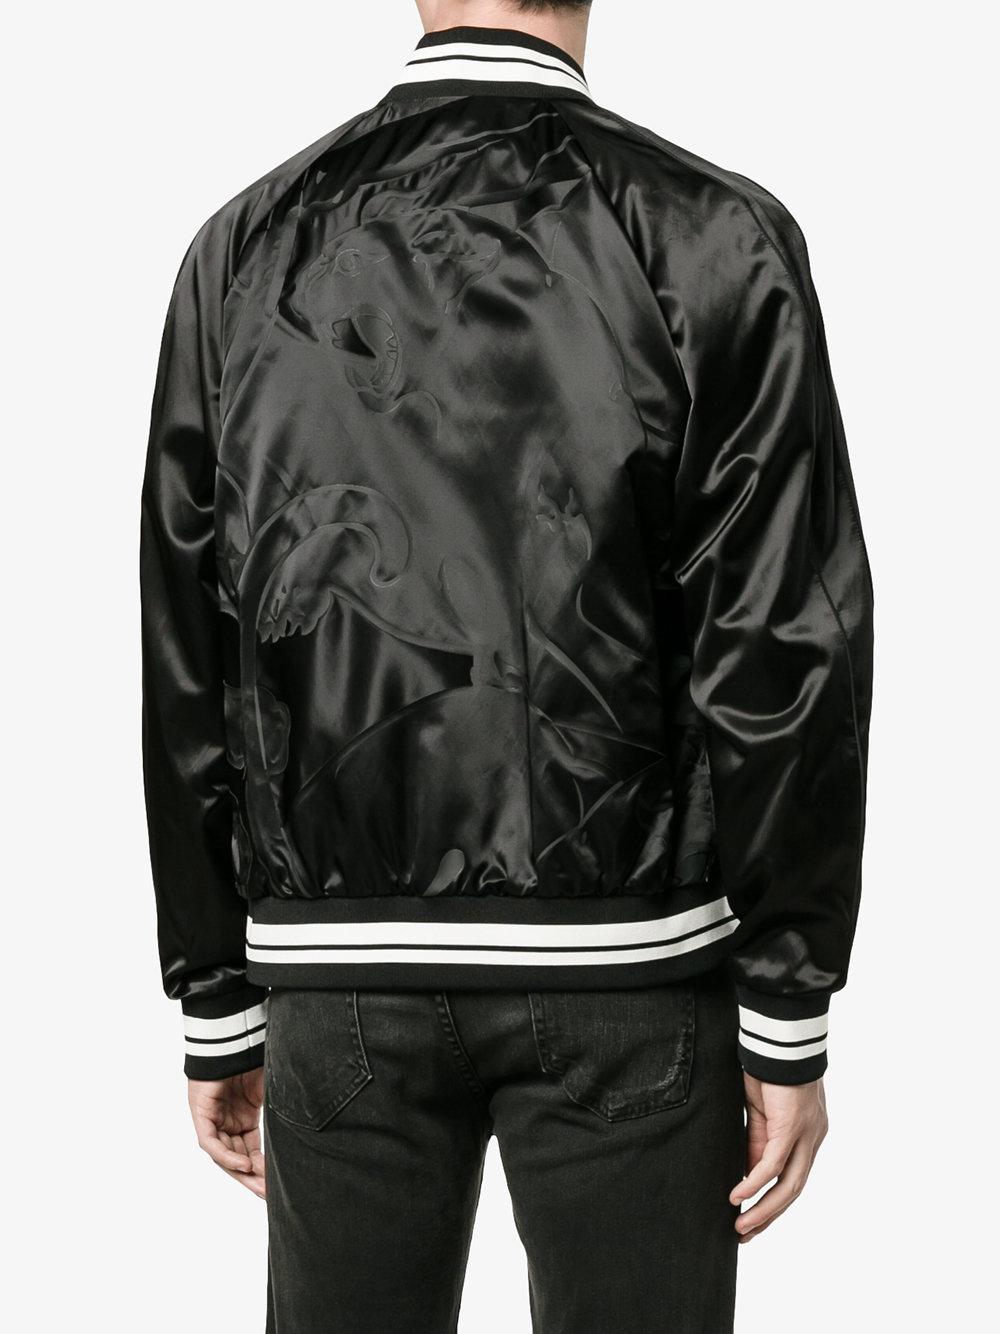 Valentino Cotton Panther Bomber Jacket in Black for Men - Lyst